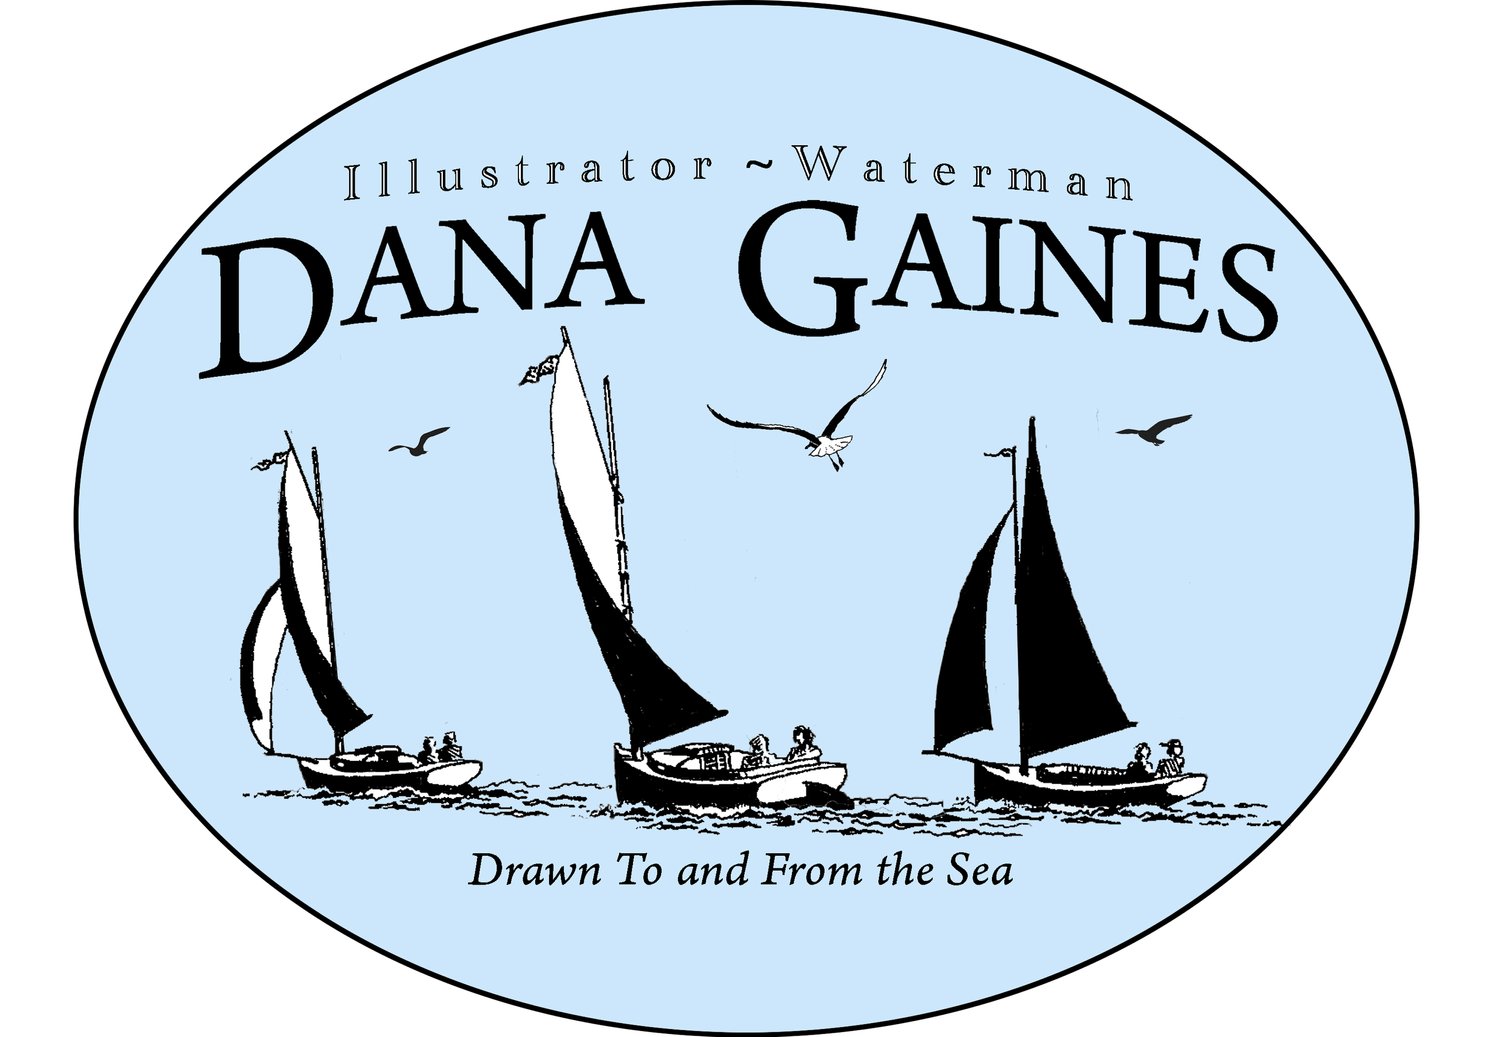 Dana Gaines, Images and Illustrations